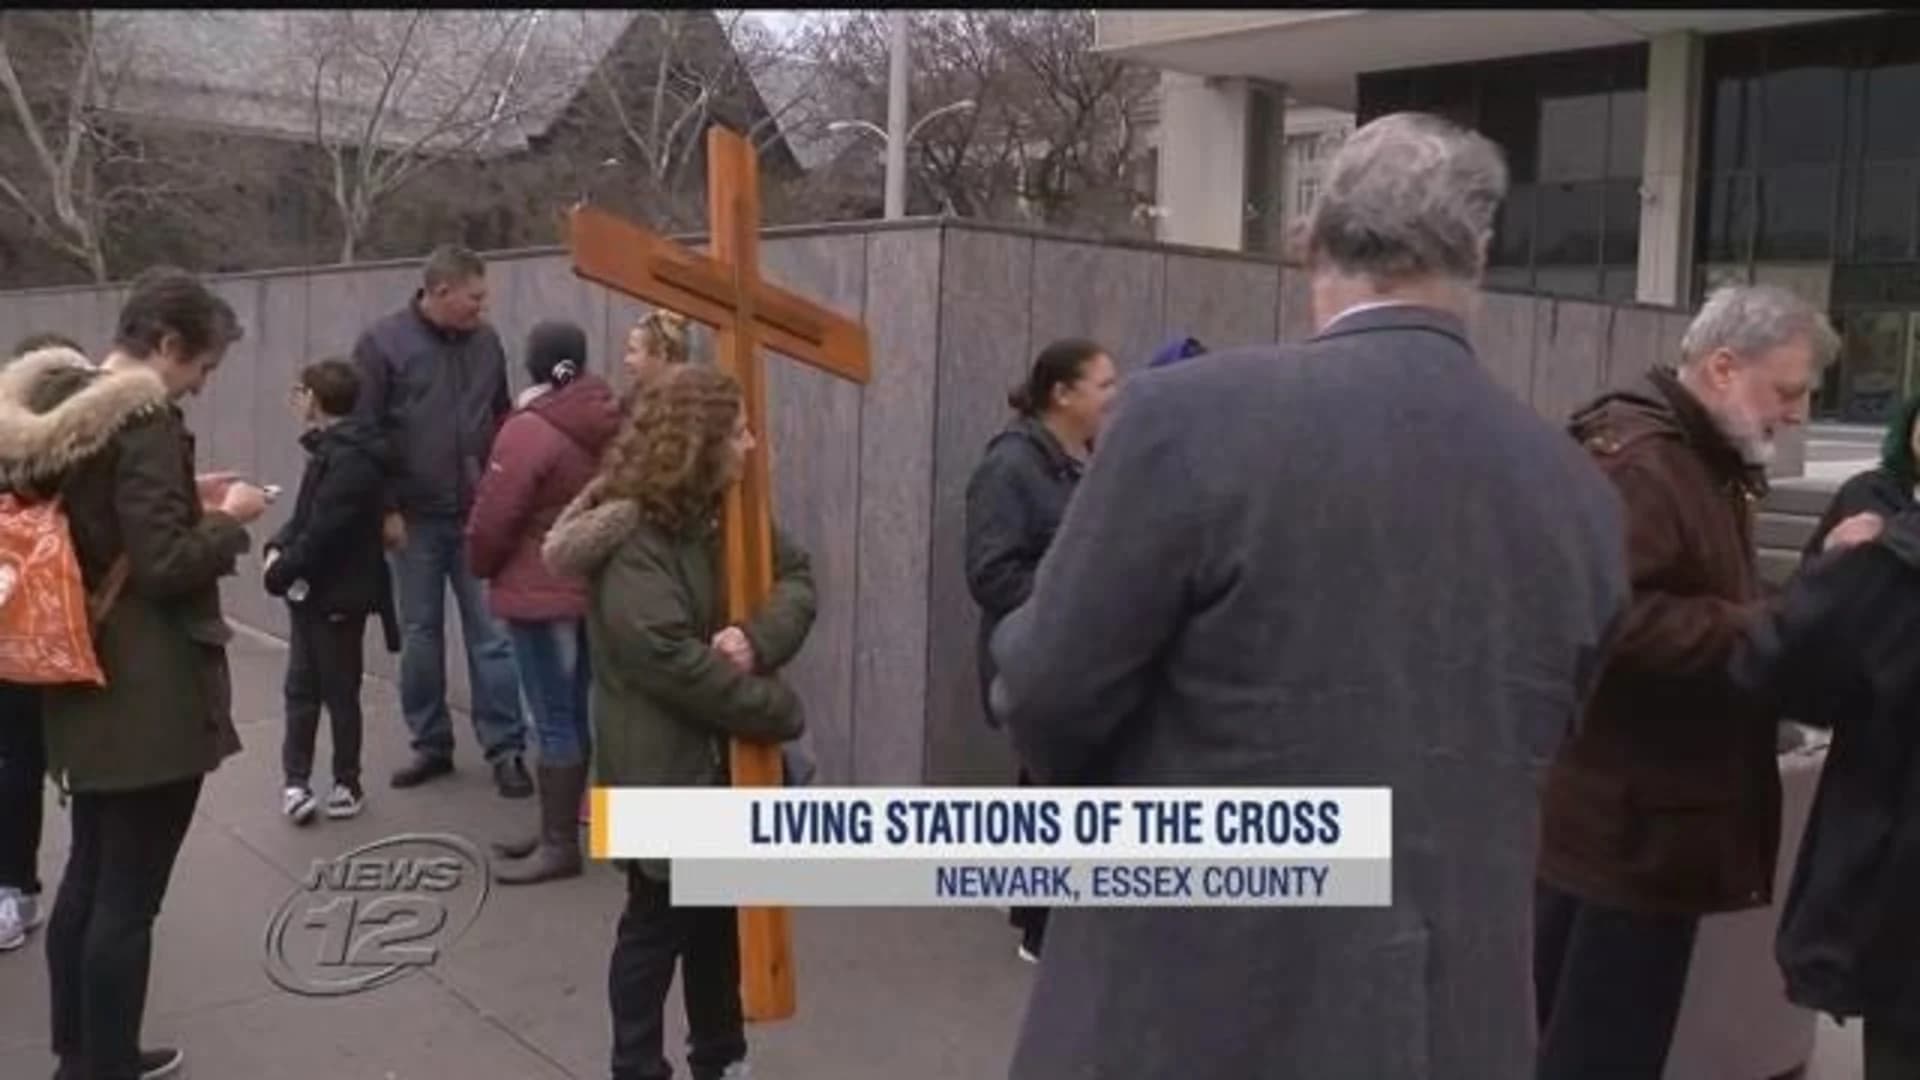 ‘Living’ Stations of the Cross event held in Newark